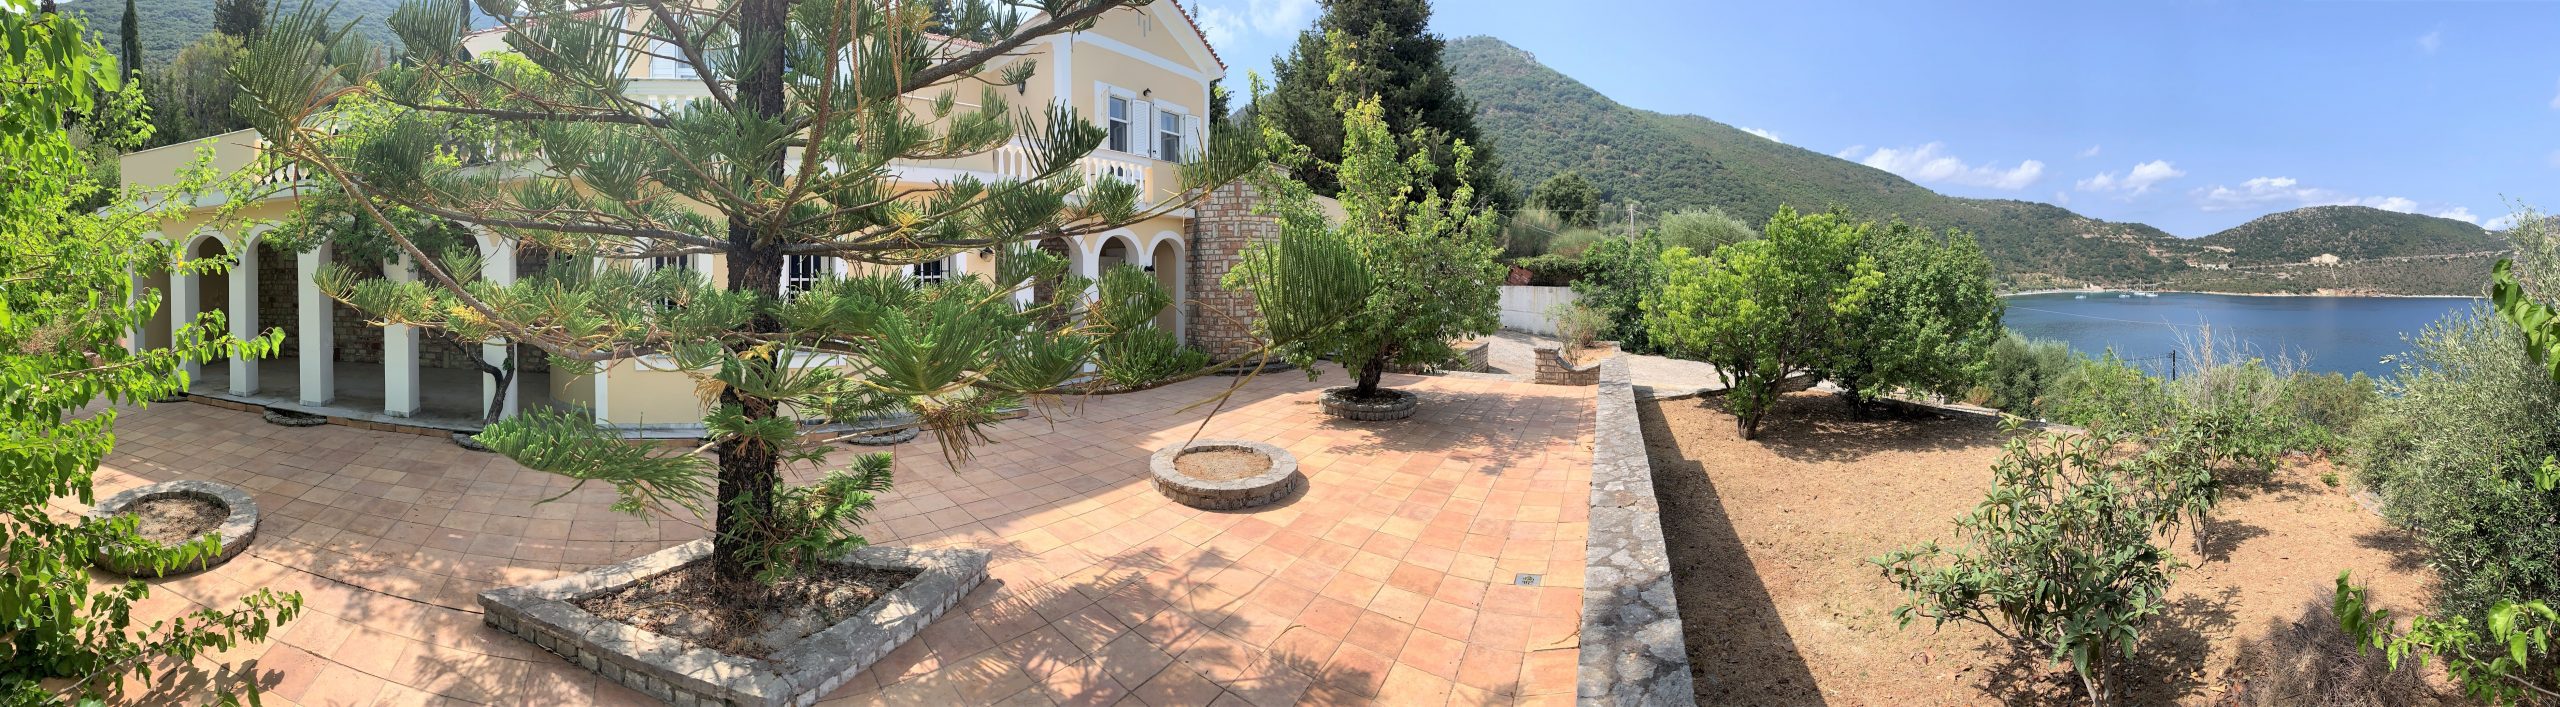 Outdoor area of house for rent on Ithaca Greece, Brosta Aetos